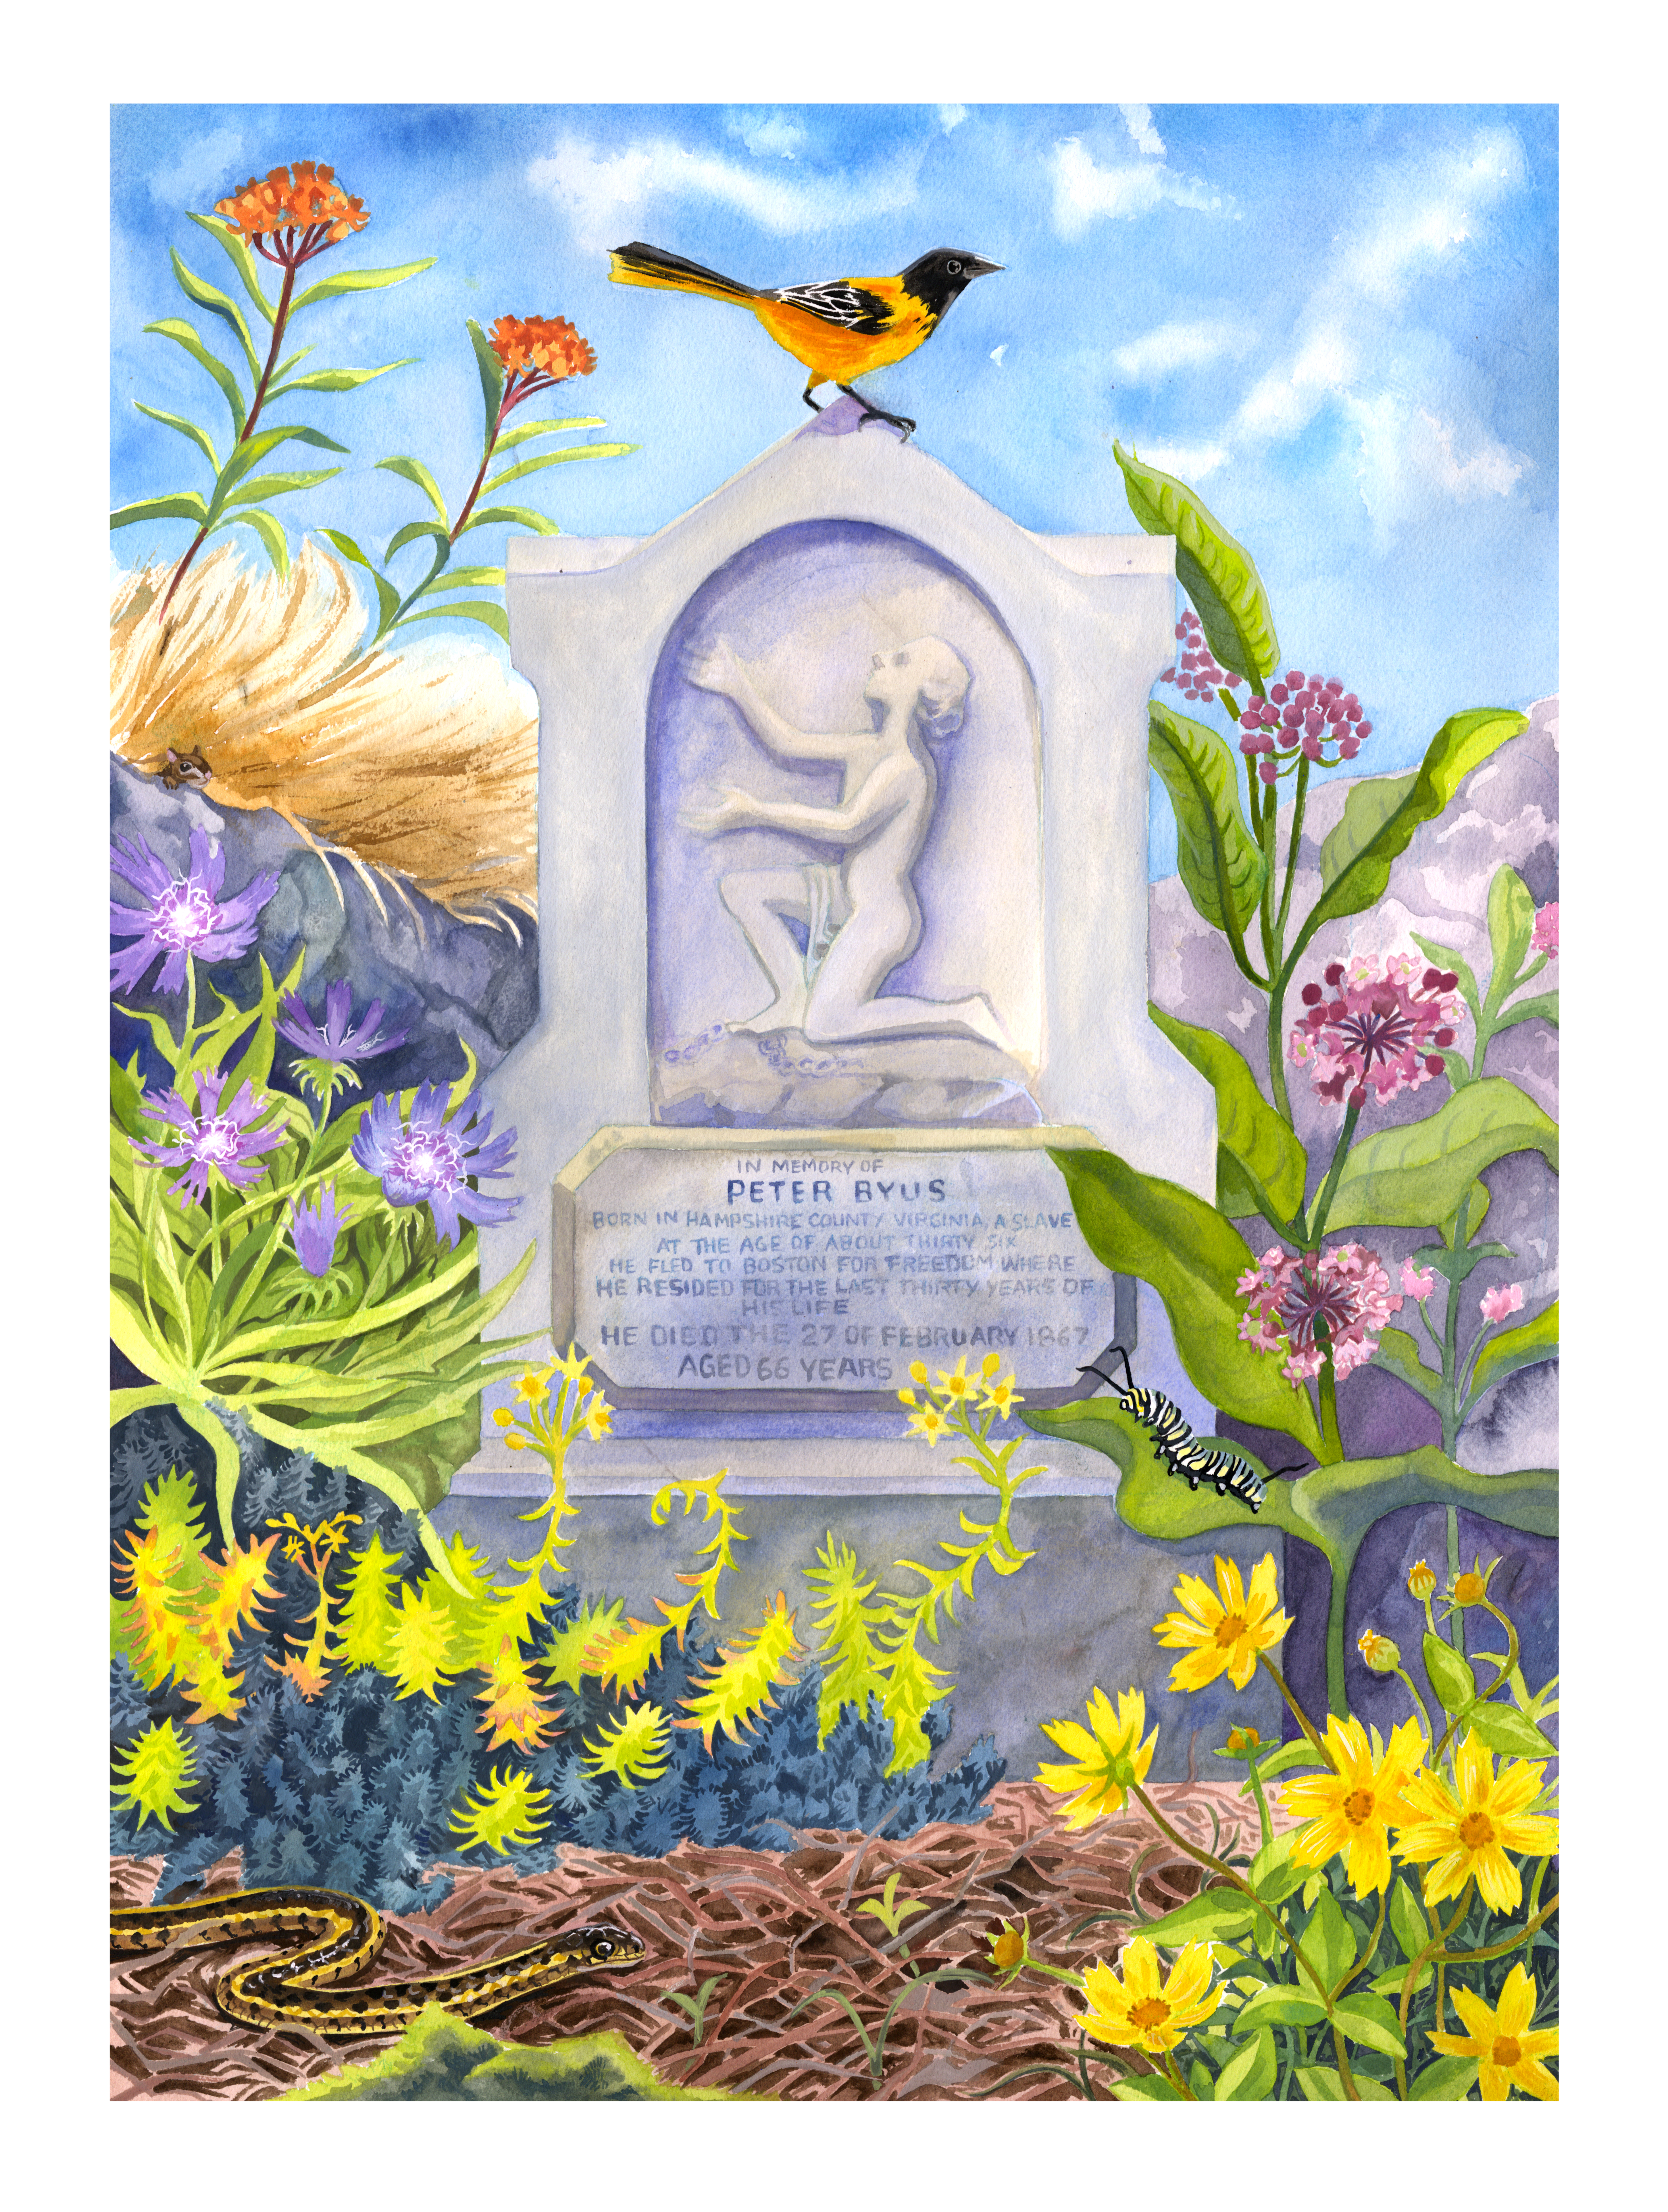 Painting of a grave